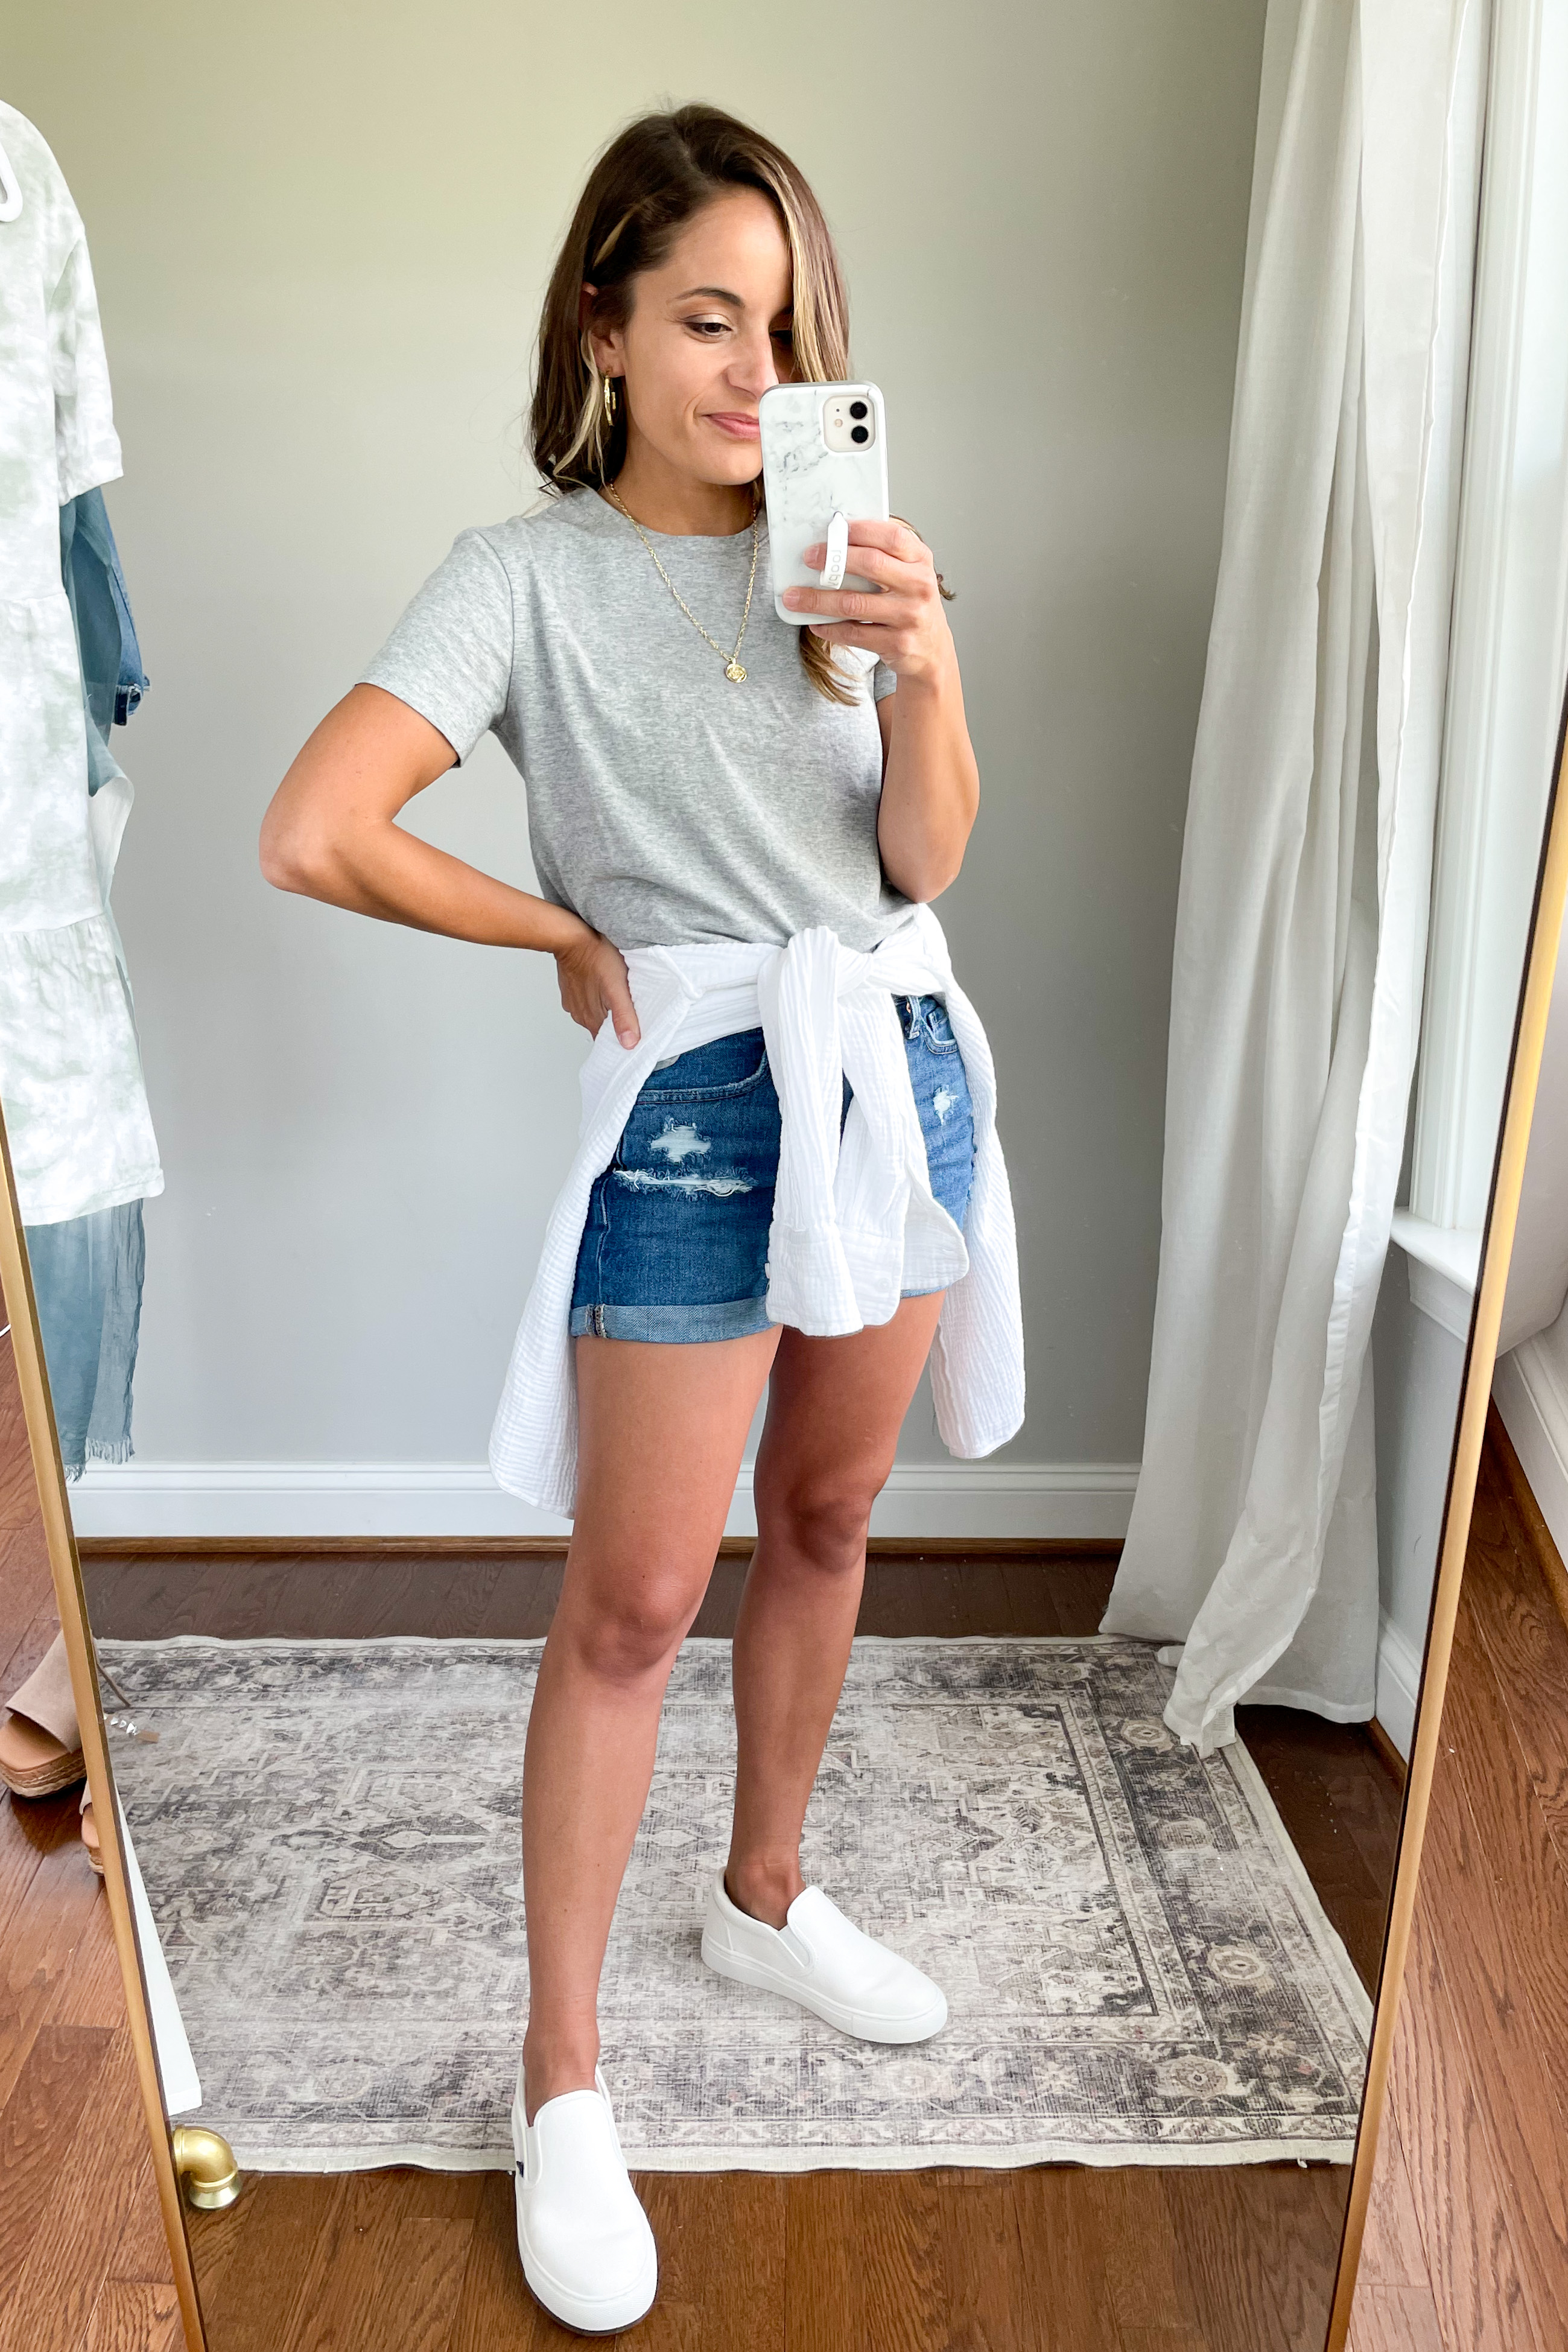 10 Items 20+ Summer Outfits - Pumps & Push Ups